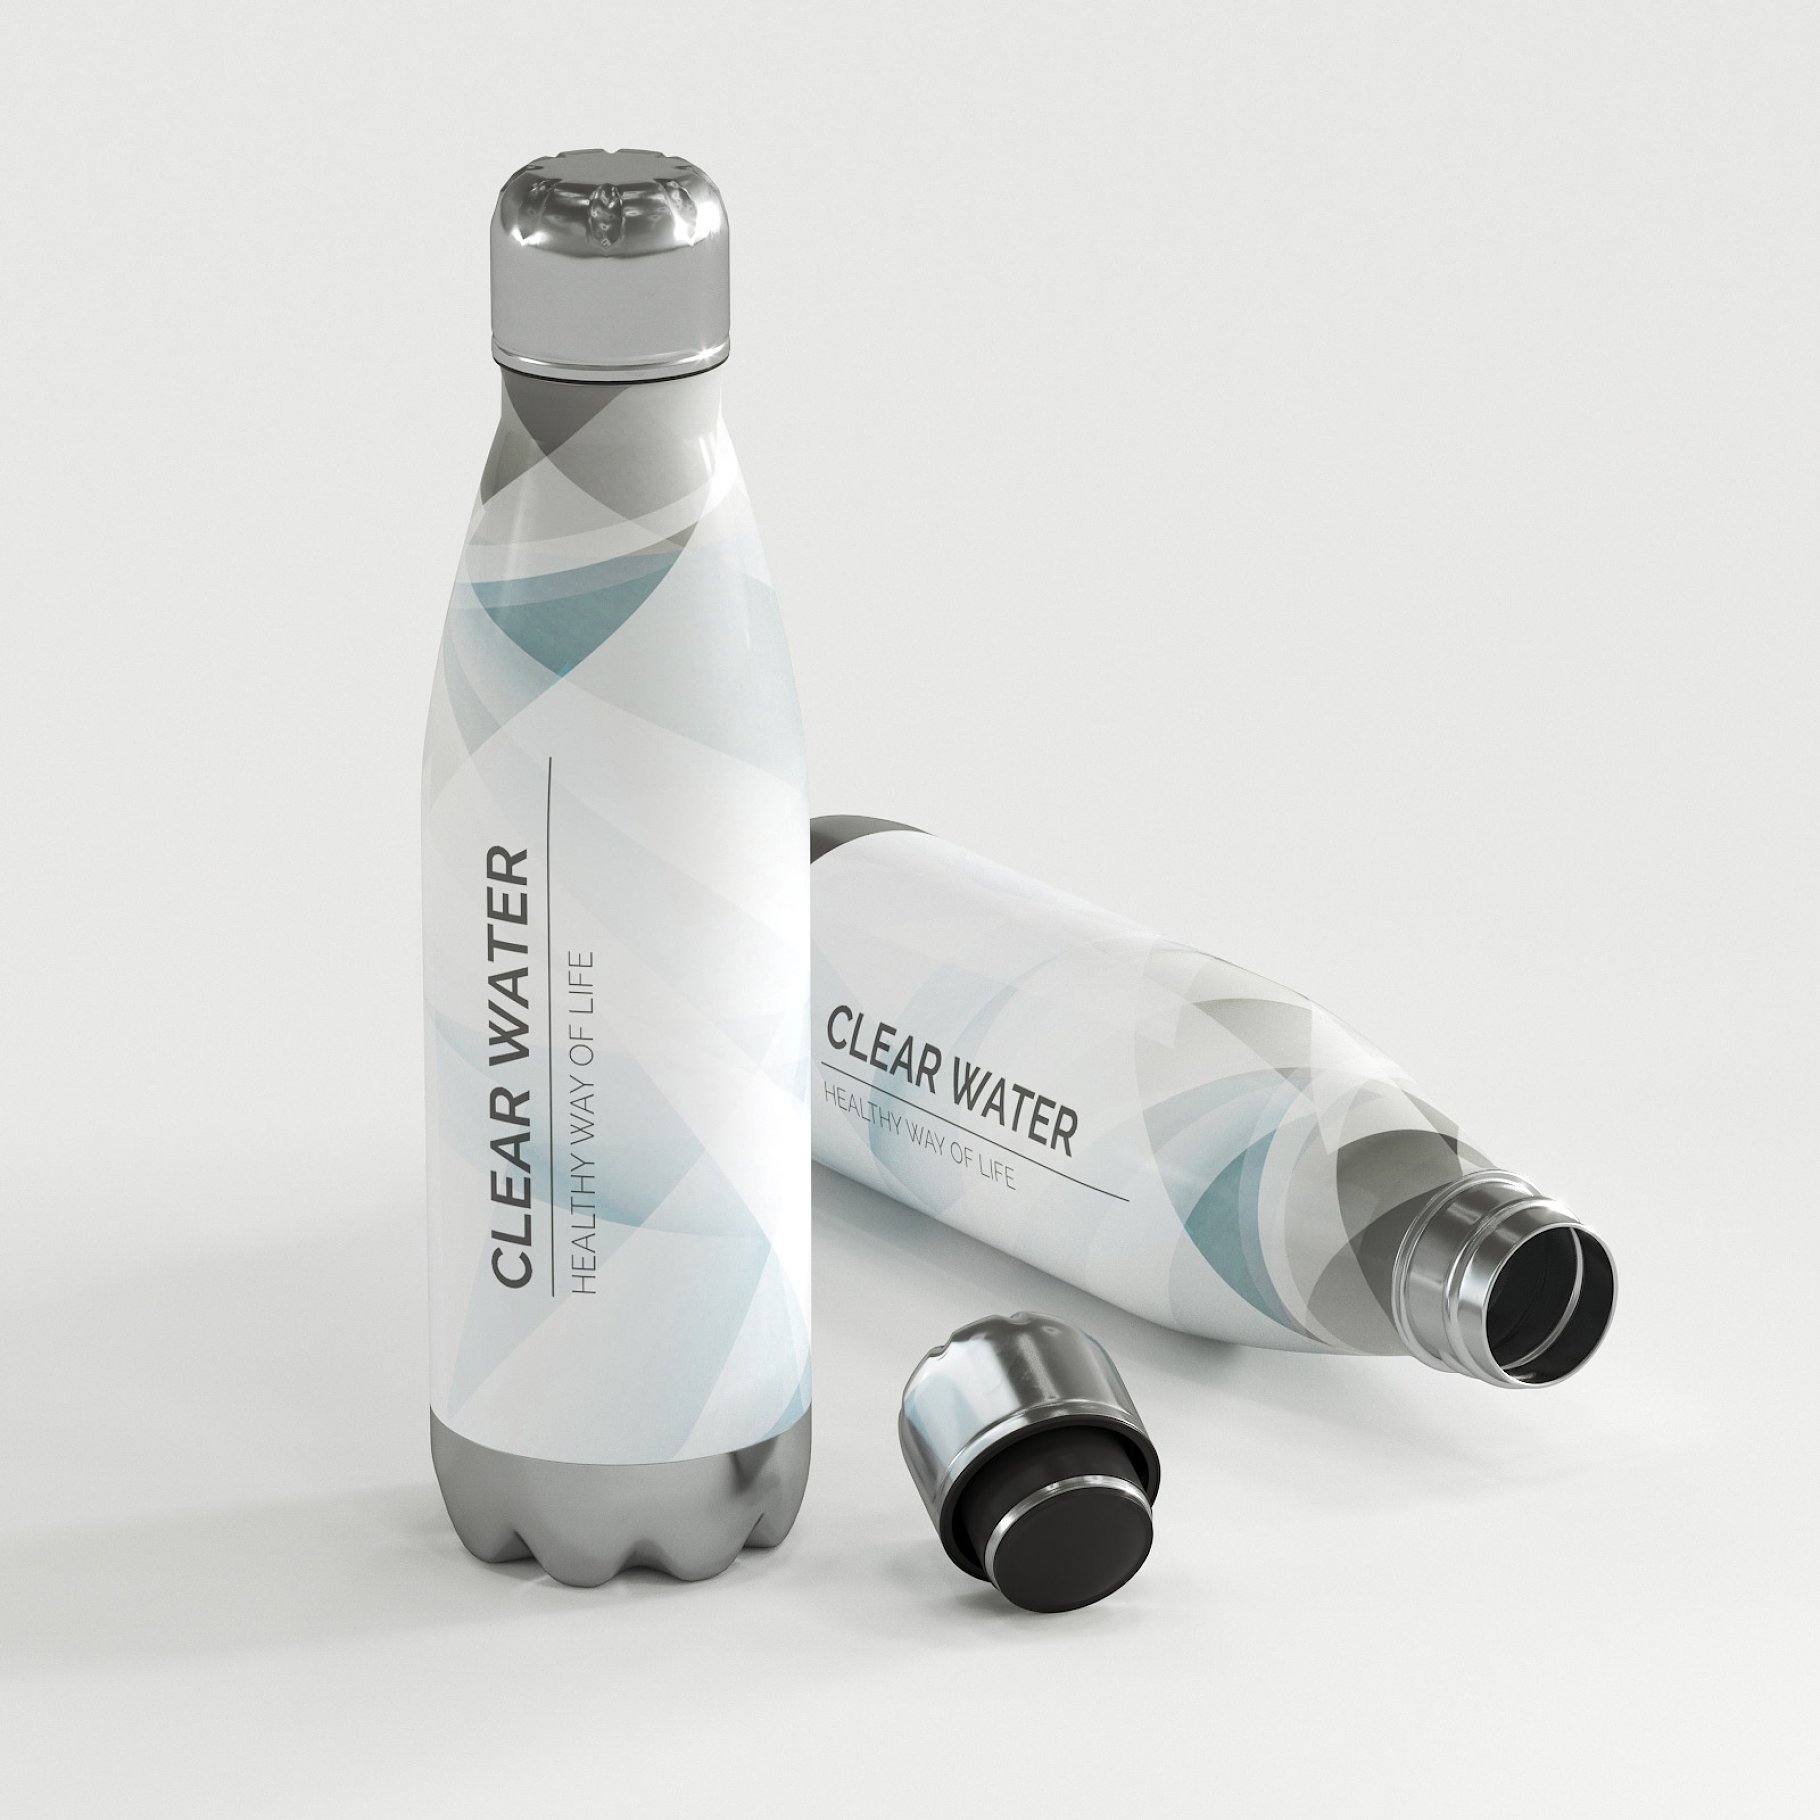 Images of a charming 3d model of bottles with texture